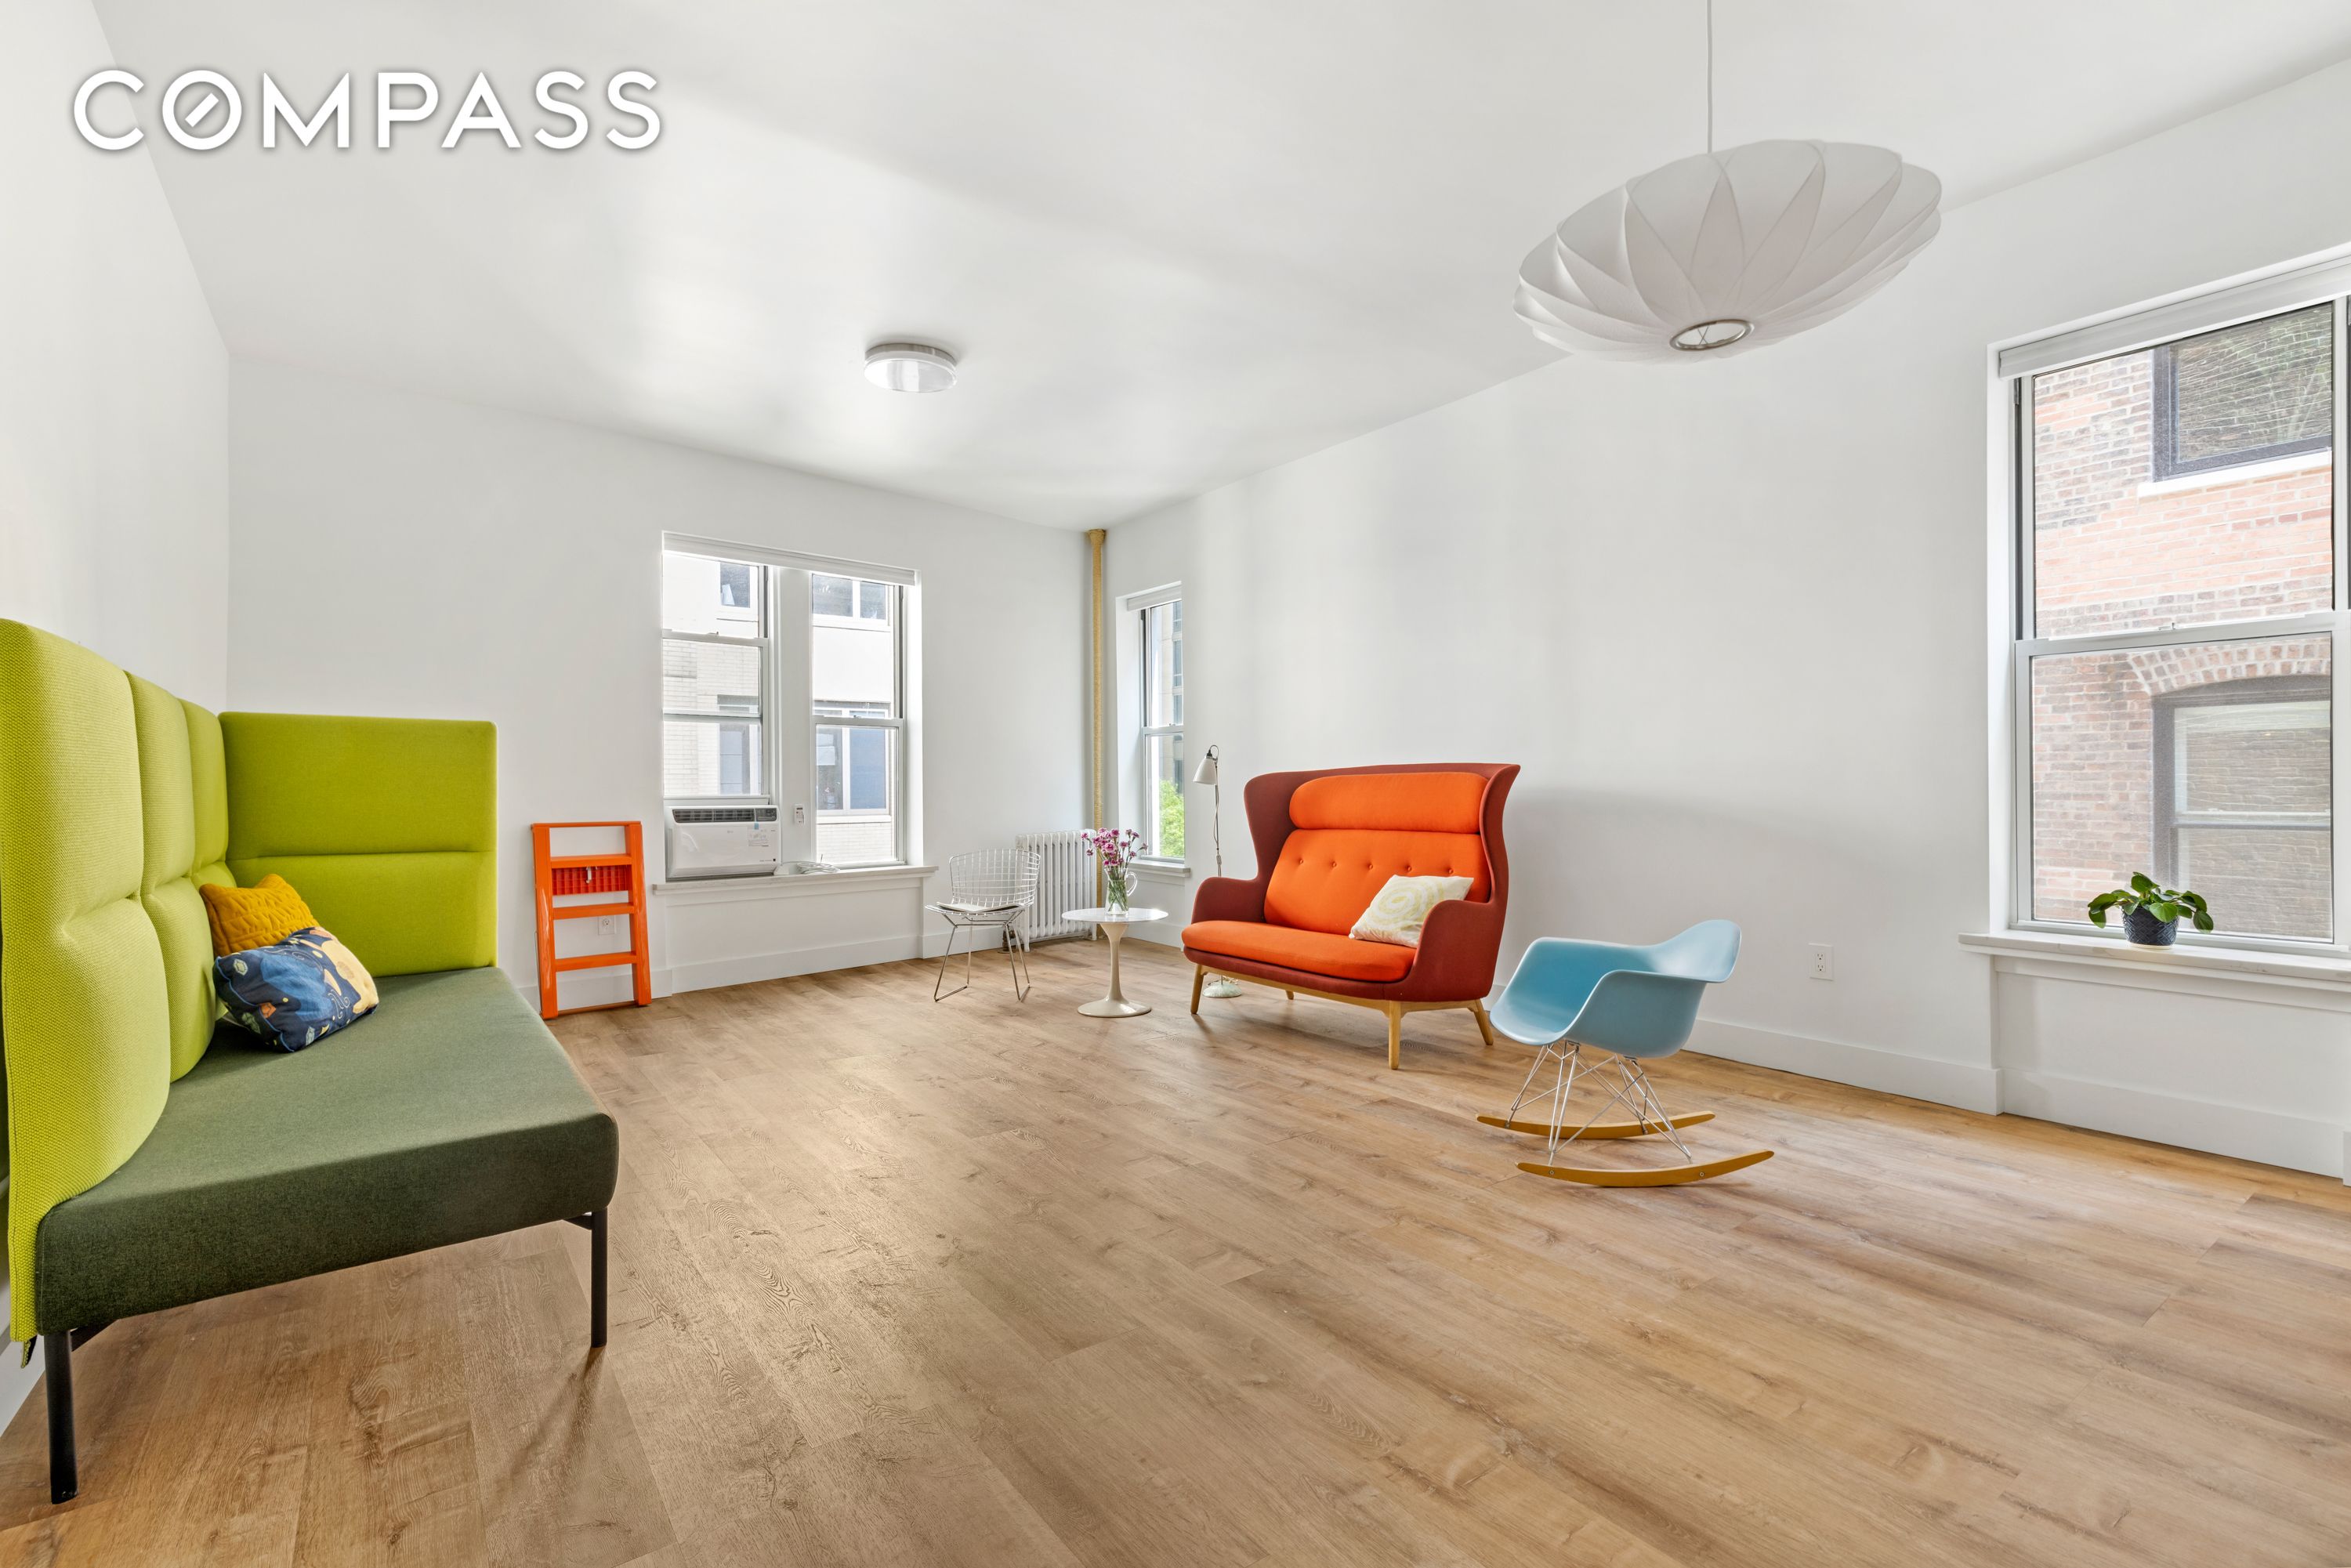 345 West 70th Street 5F, Upper West Side, Upper West Side, NYC - 2 Bedrooms  
1 Bathrooms  
4 Rooms - 